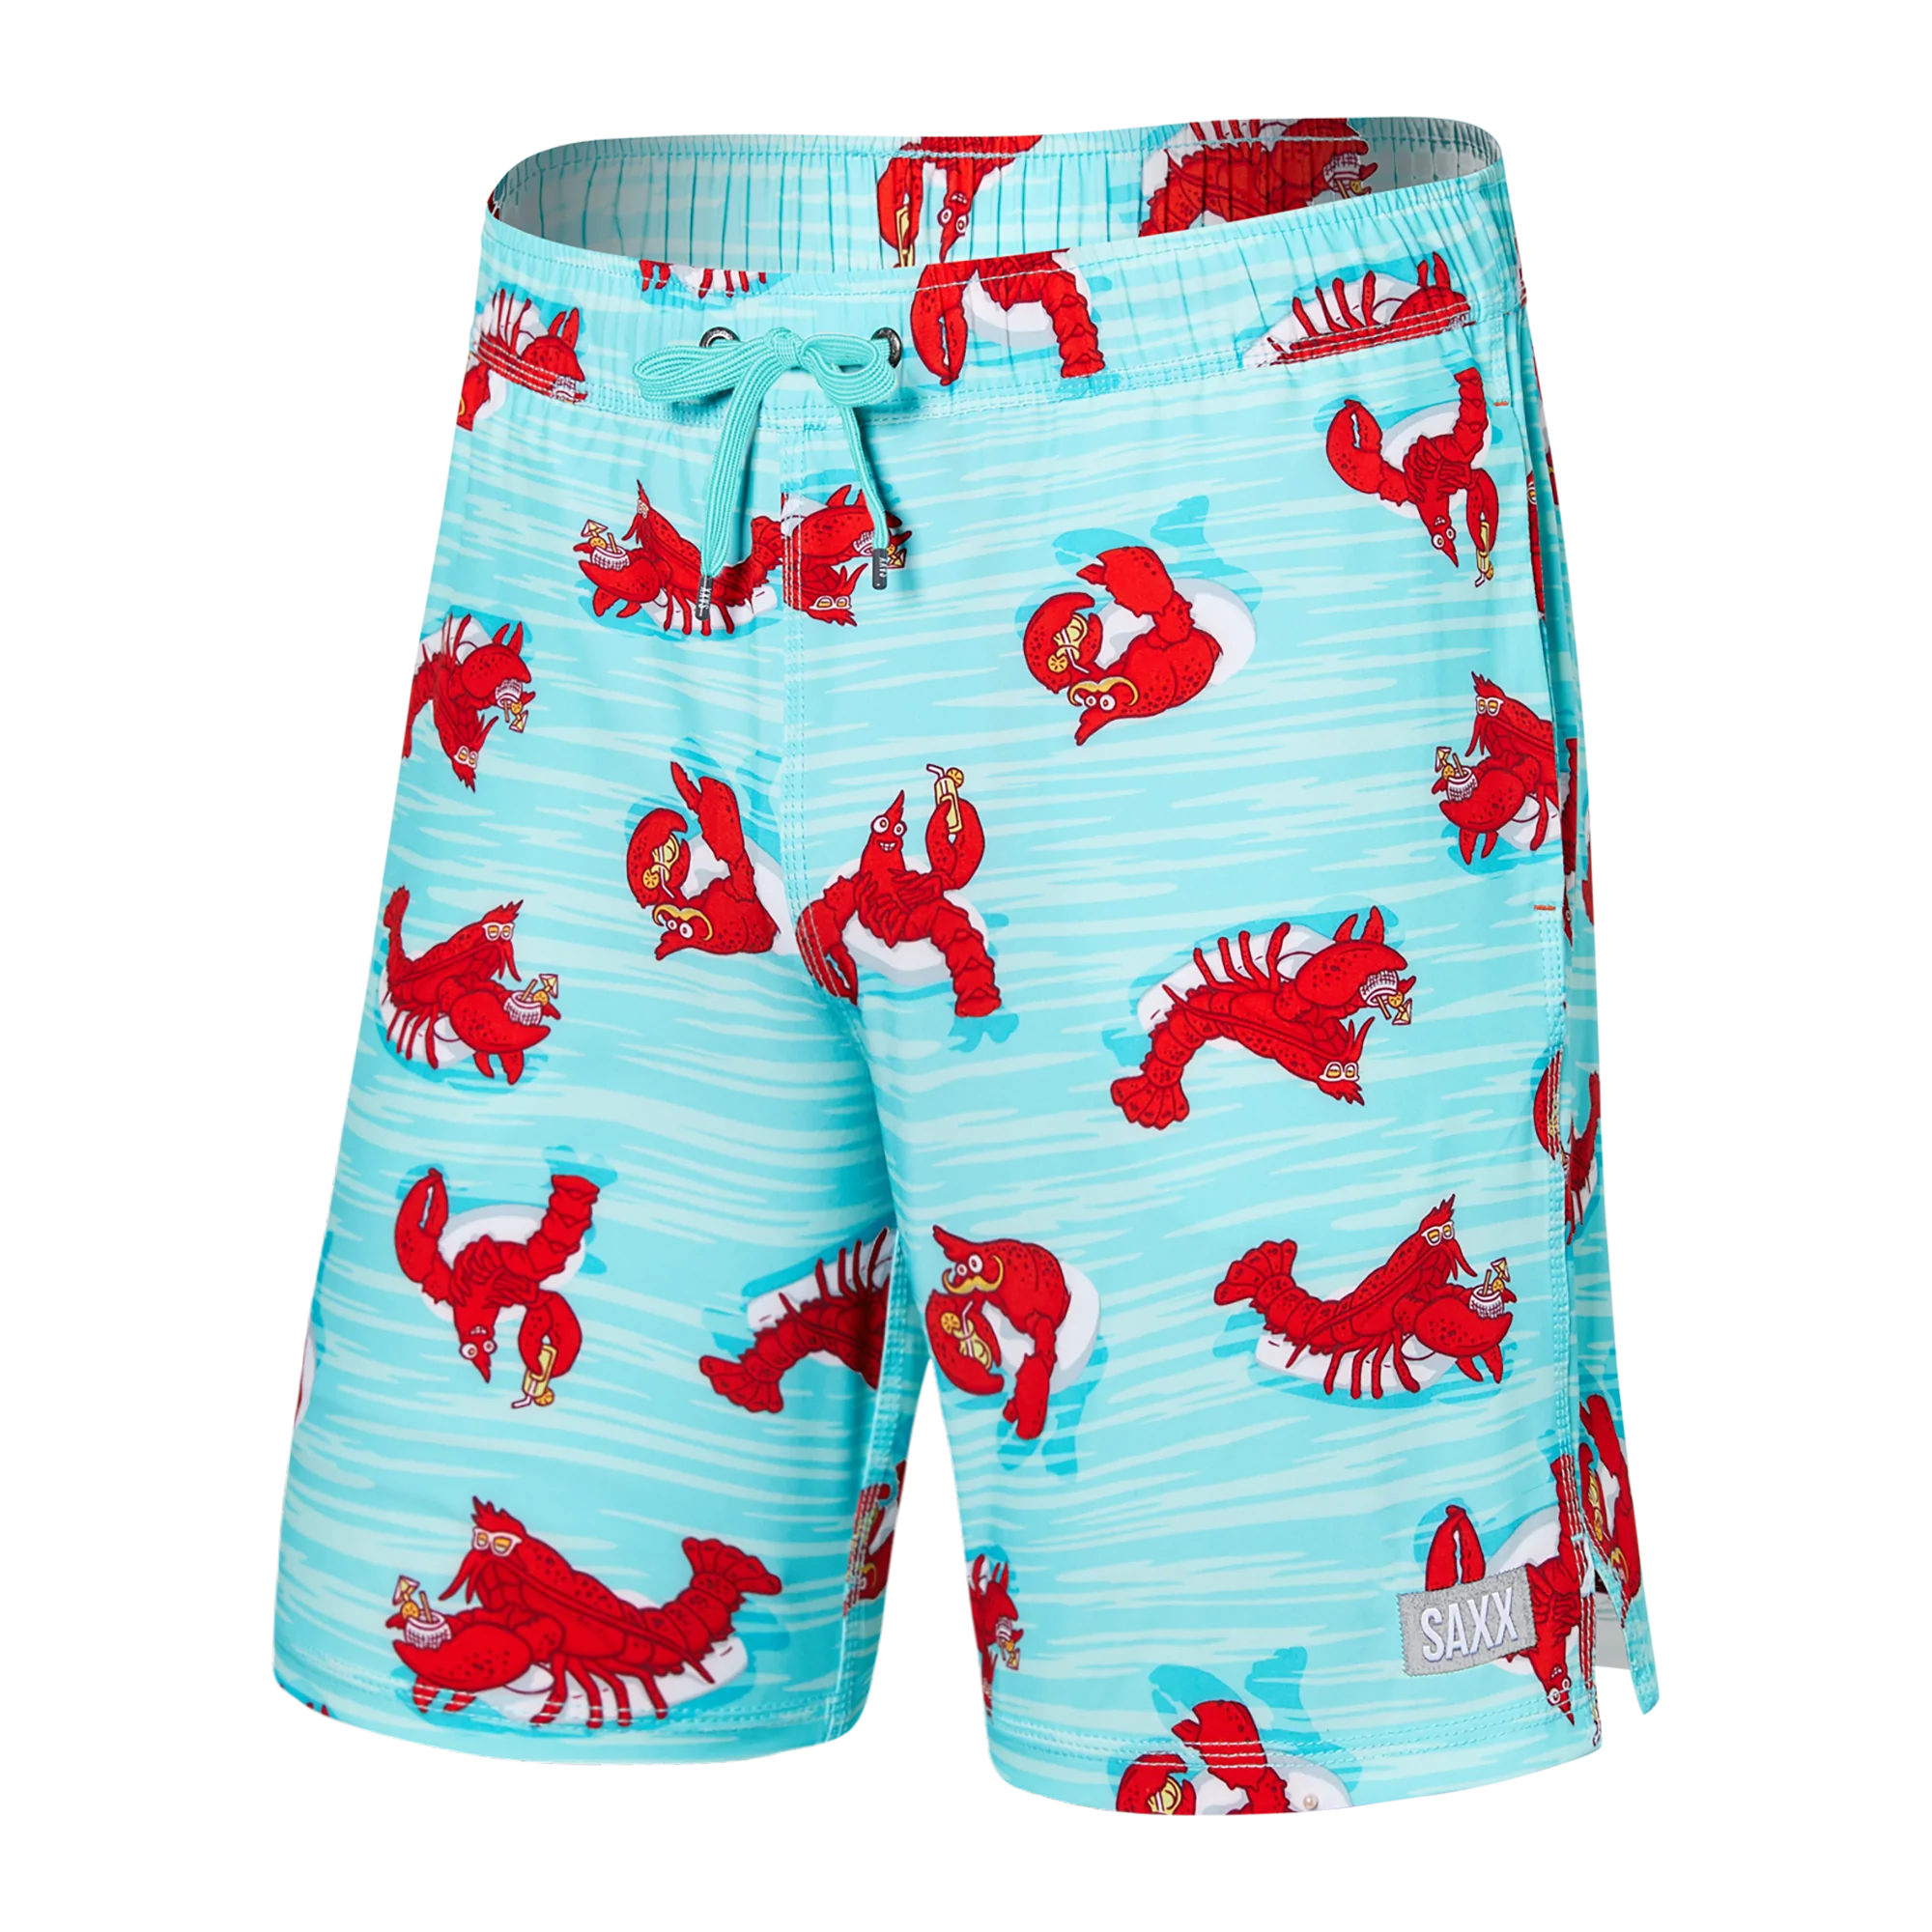 Front of Oh Buoy 2N1 Swim Volley Short 7" in Lobster Lounger- Aqua